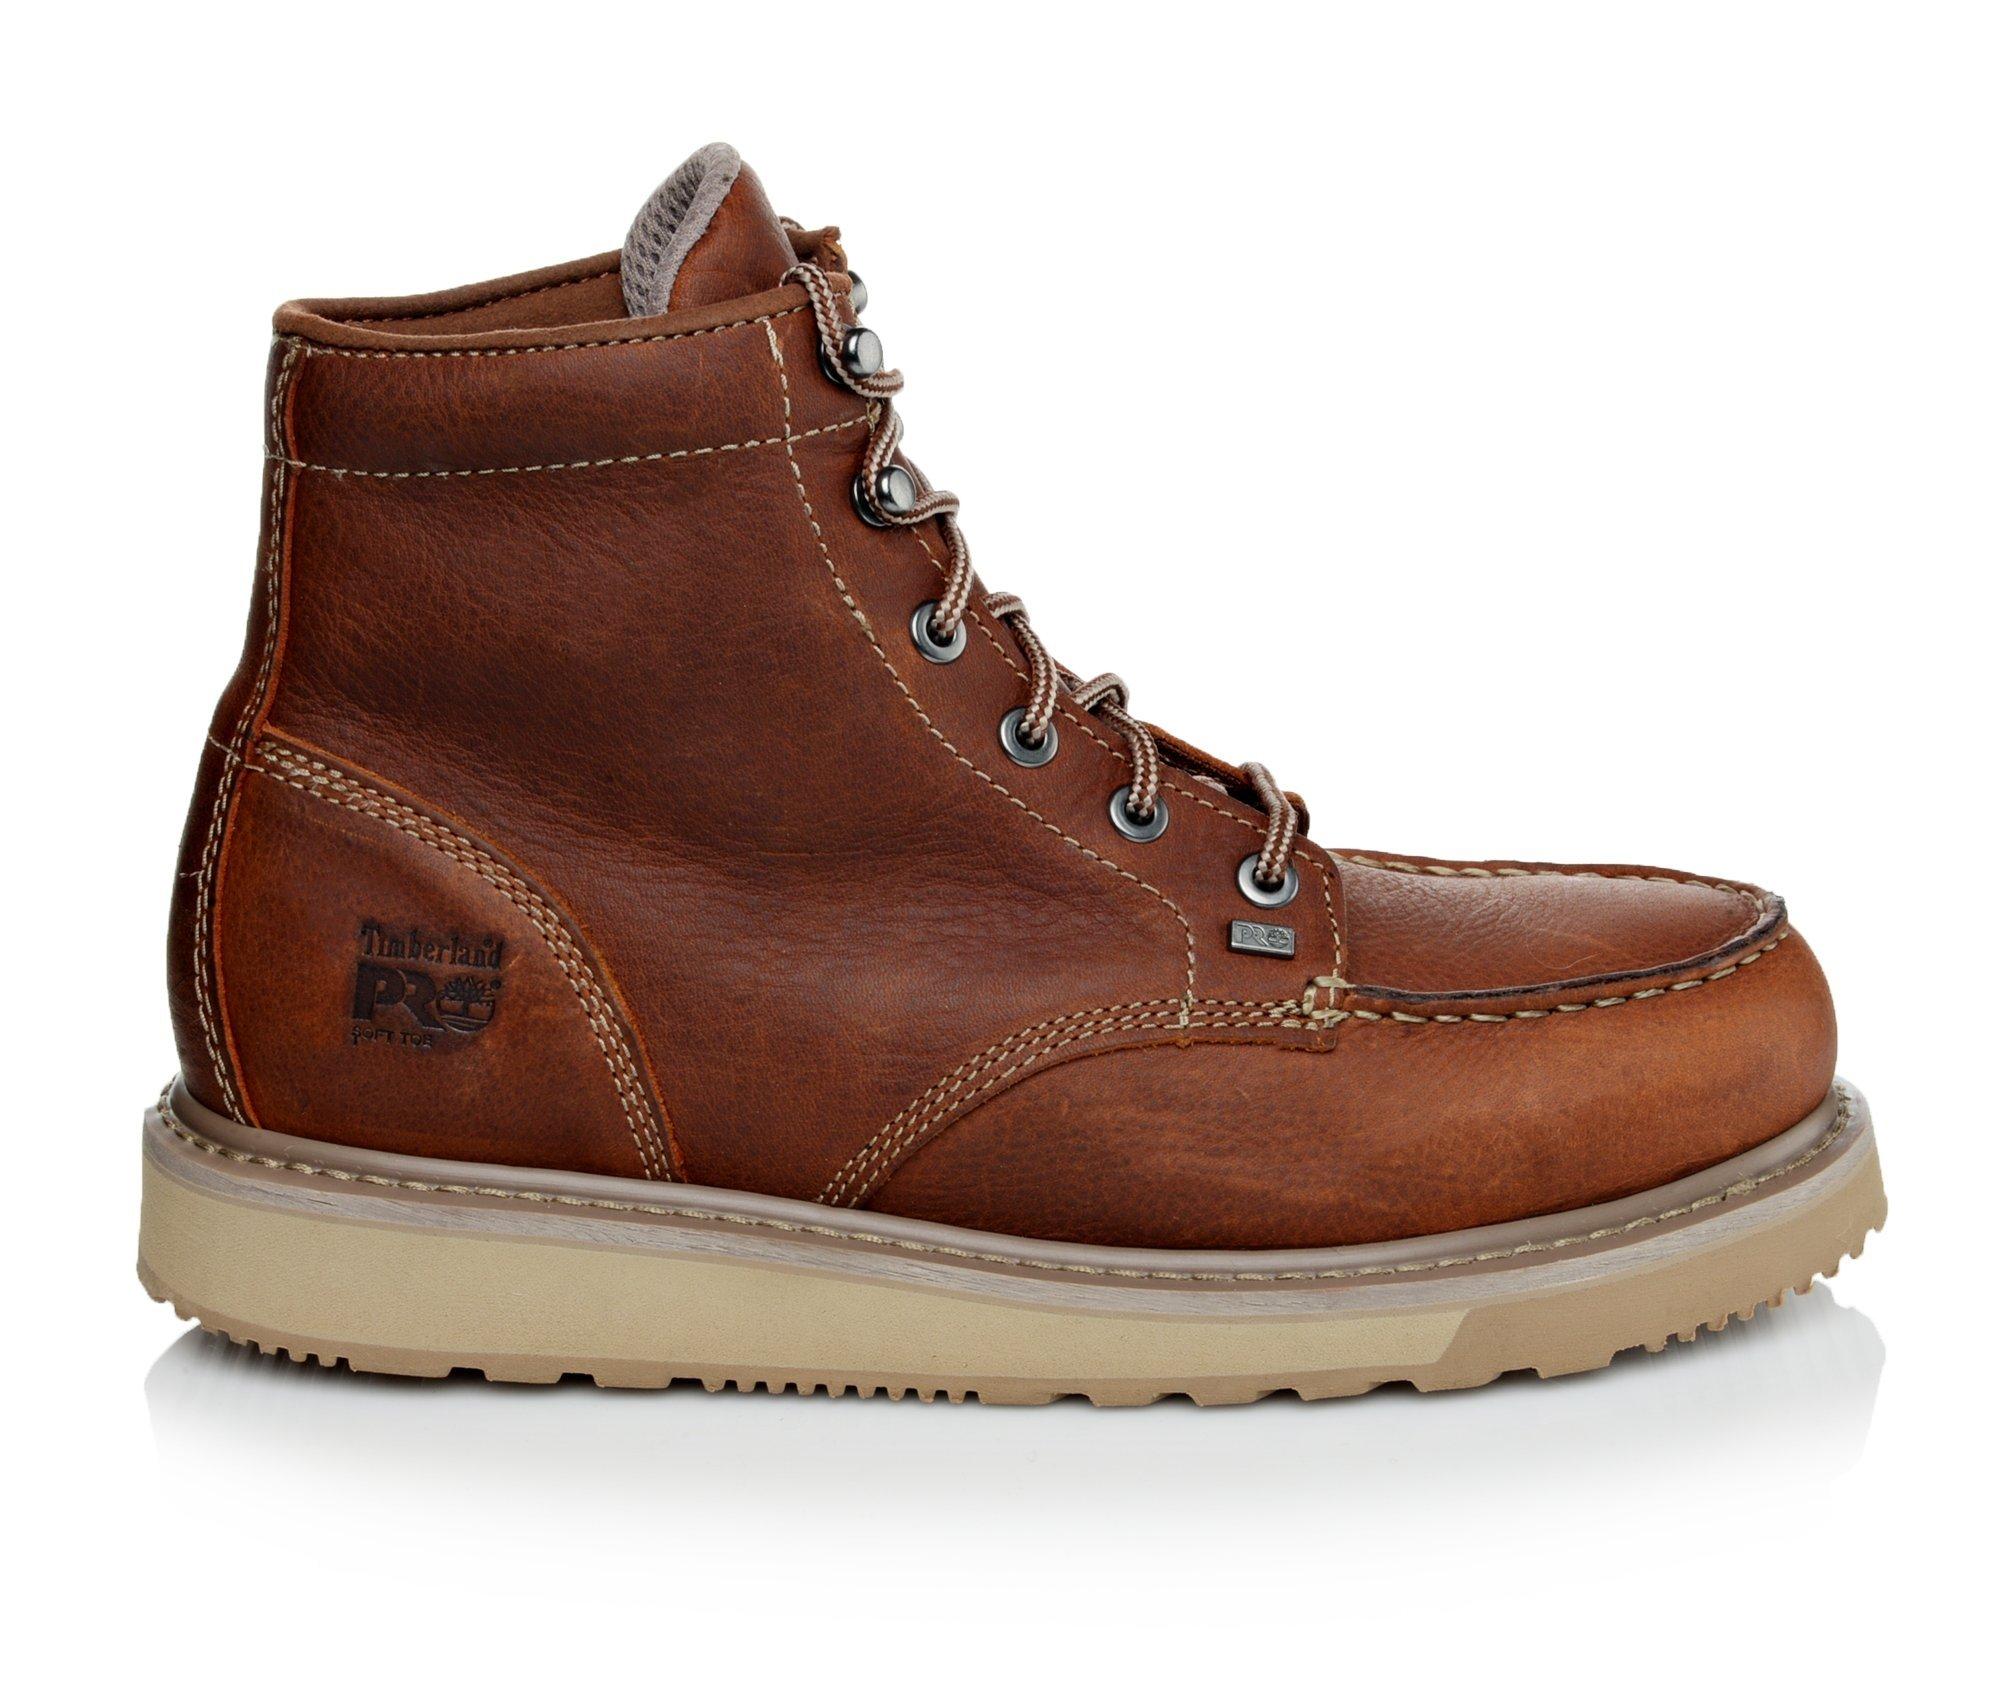 Men's Timberland Pro Barstow Wedge Boots